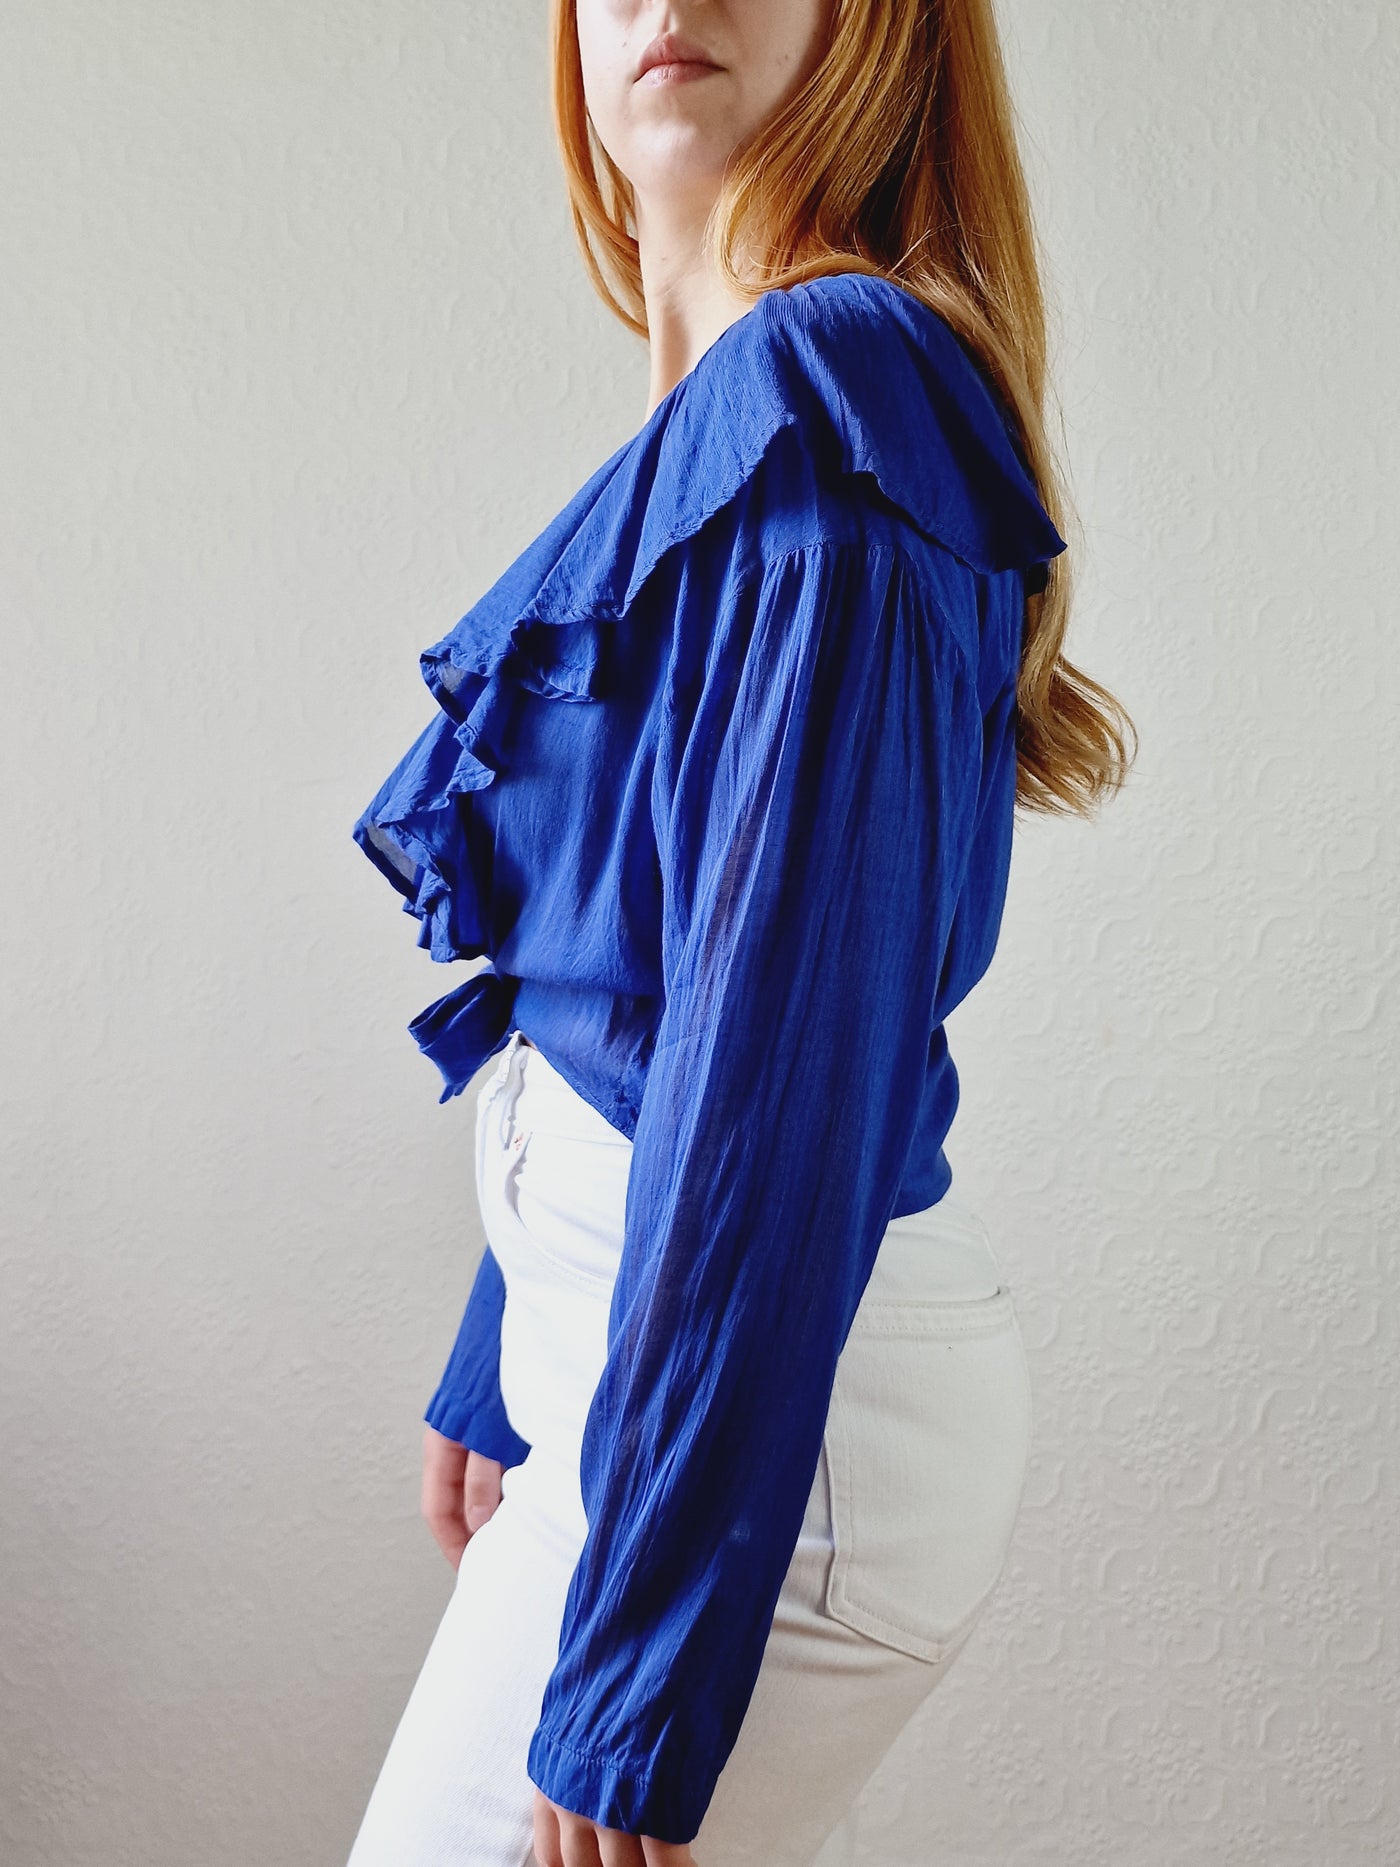 Vintage Electric Blue Blouse with Ruffles and Front Ties - S/M